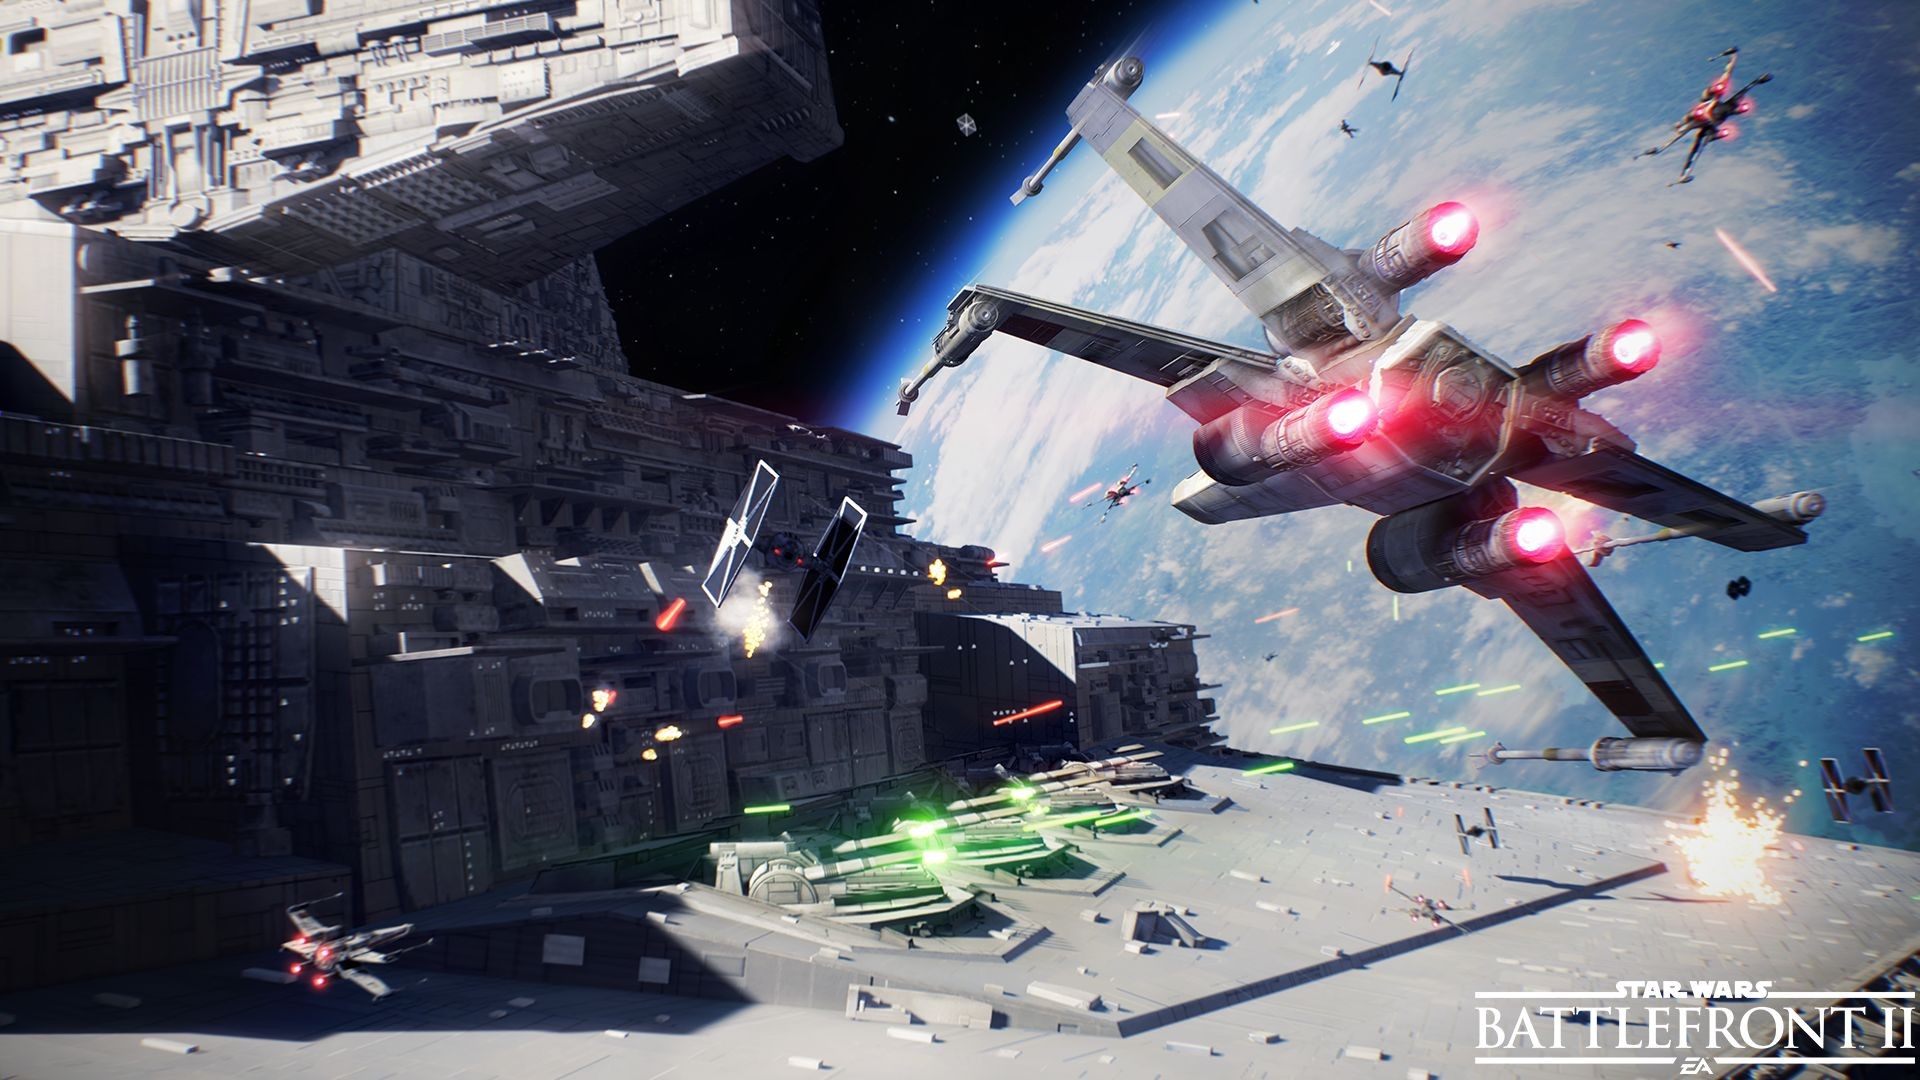 General 1920x1080 Star Destroyer X-wing Star Wars Battlefront II Star Wars: Battlefront Star Wars video games TIE Fighter Star Wars Ships PC gaming video game art Electronic Arts EA DICE battle